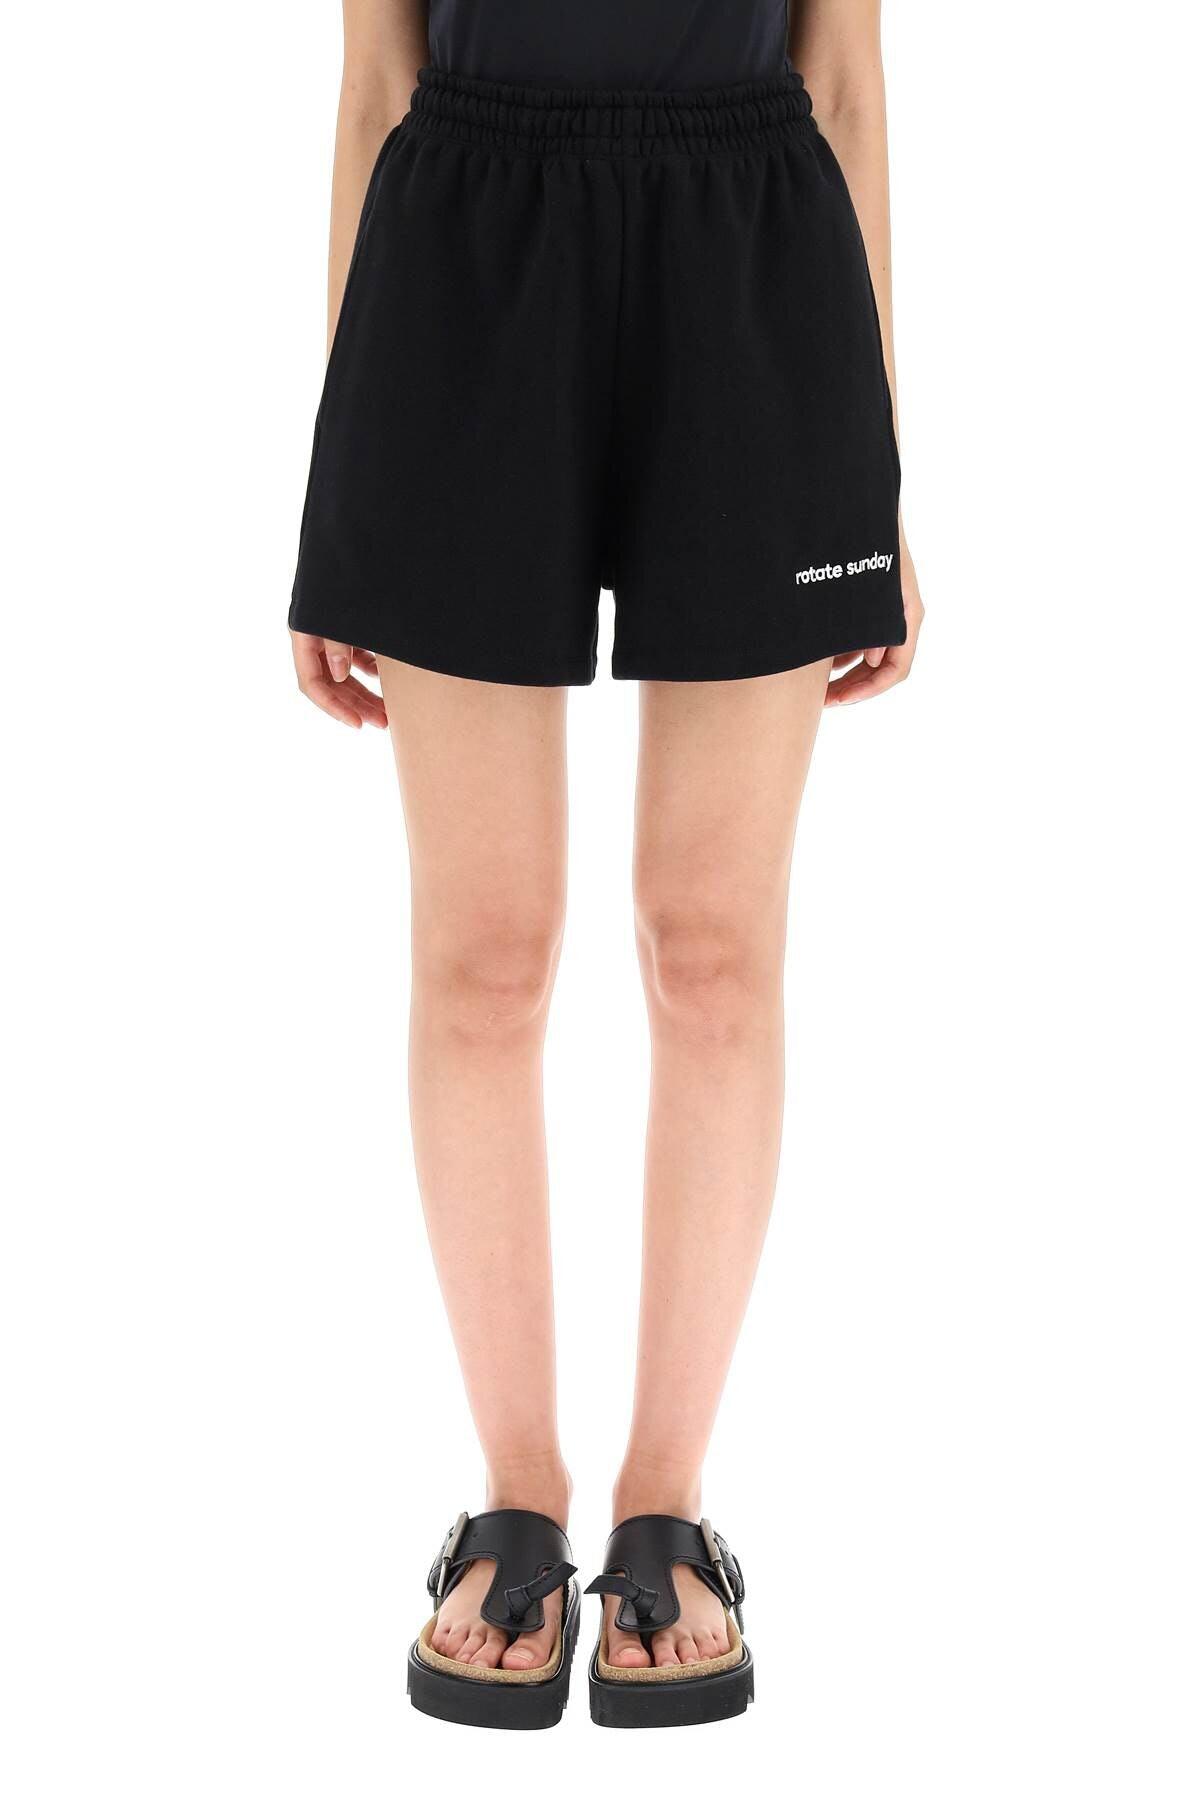 ROTATE BIRGER CHRISTENSEN Roda Shorts With Sunday Embroidery in Black | Lyst